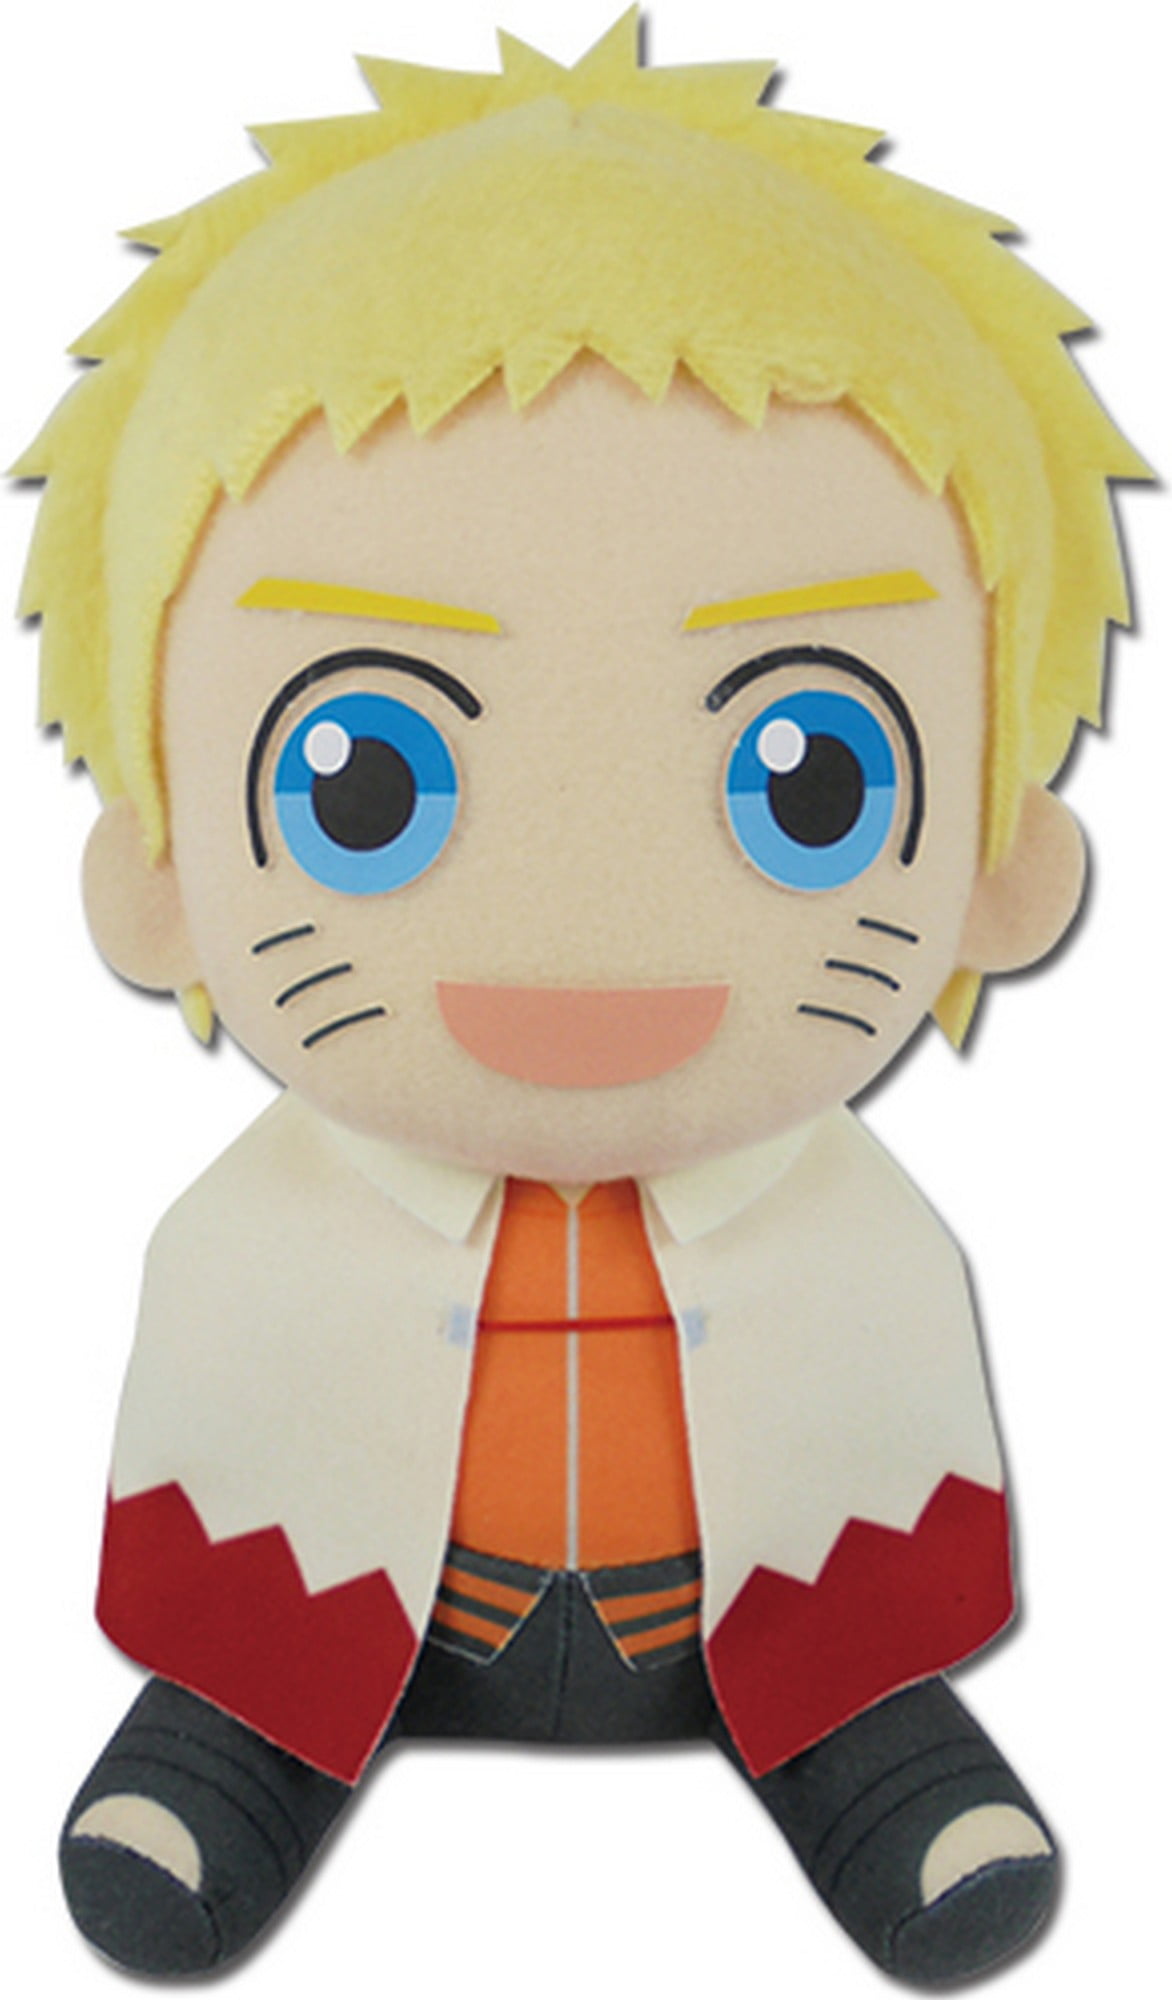 ⭐Boruto: Naruto Next Generations Tote Bag Characters - buy in the online  store Familand